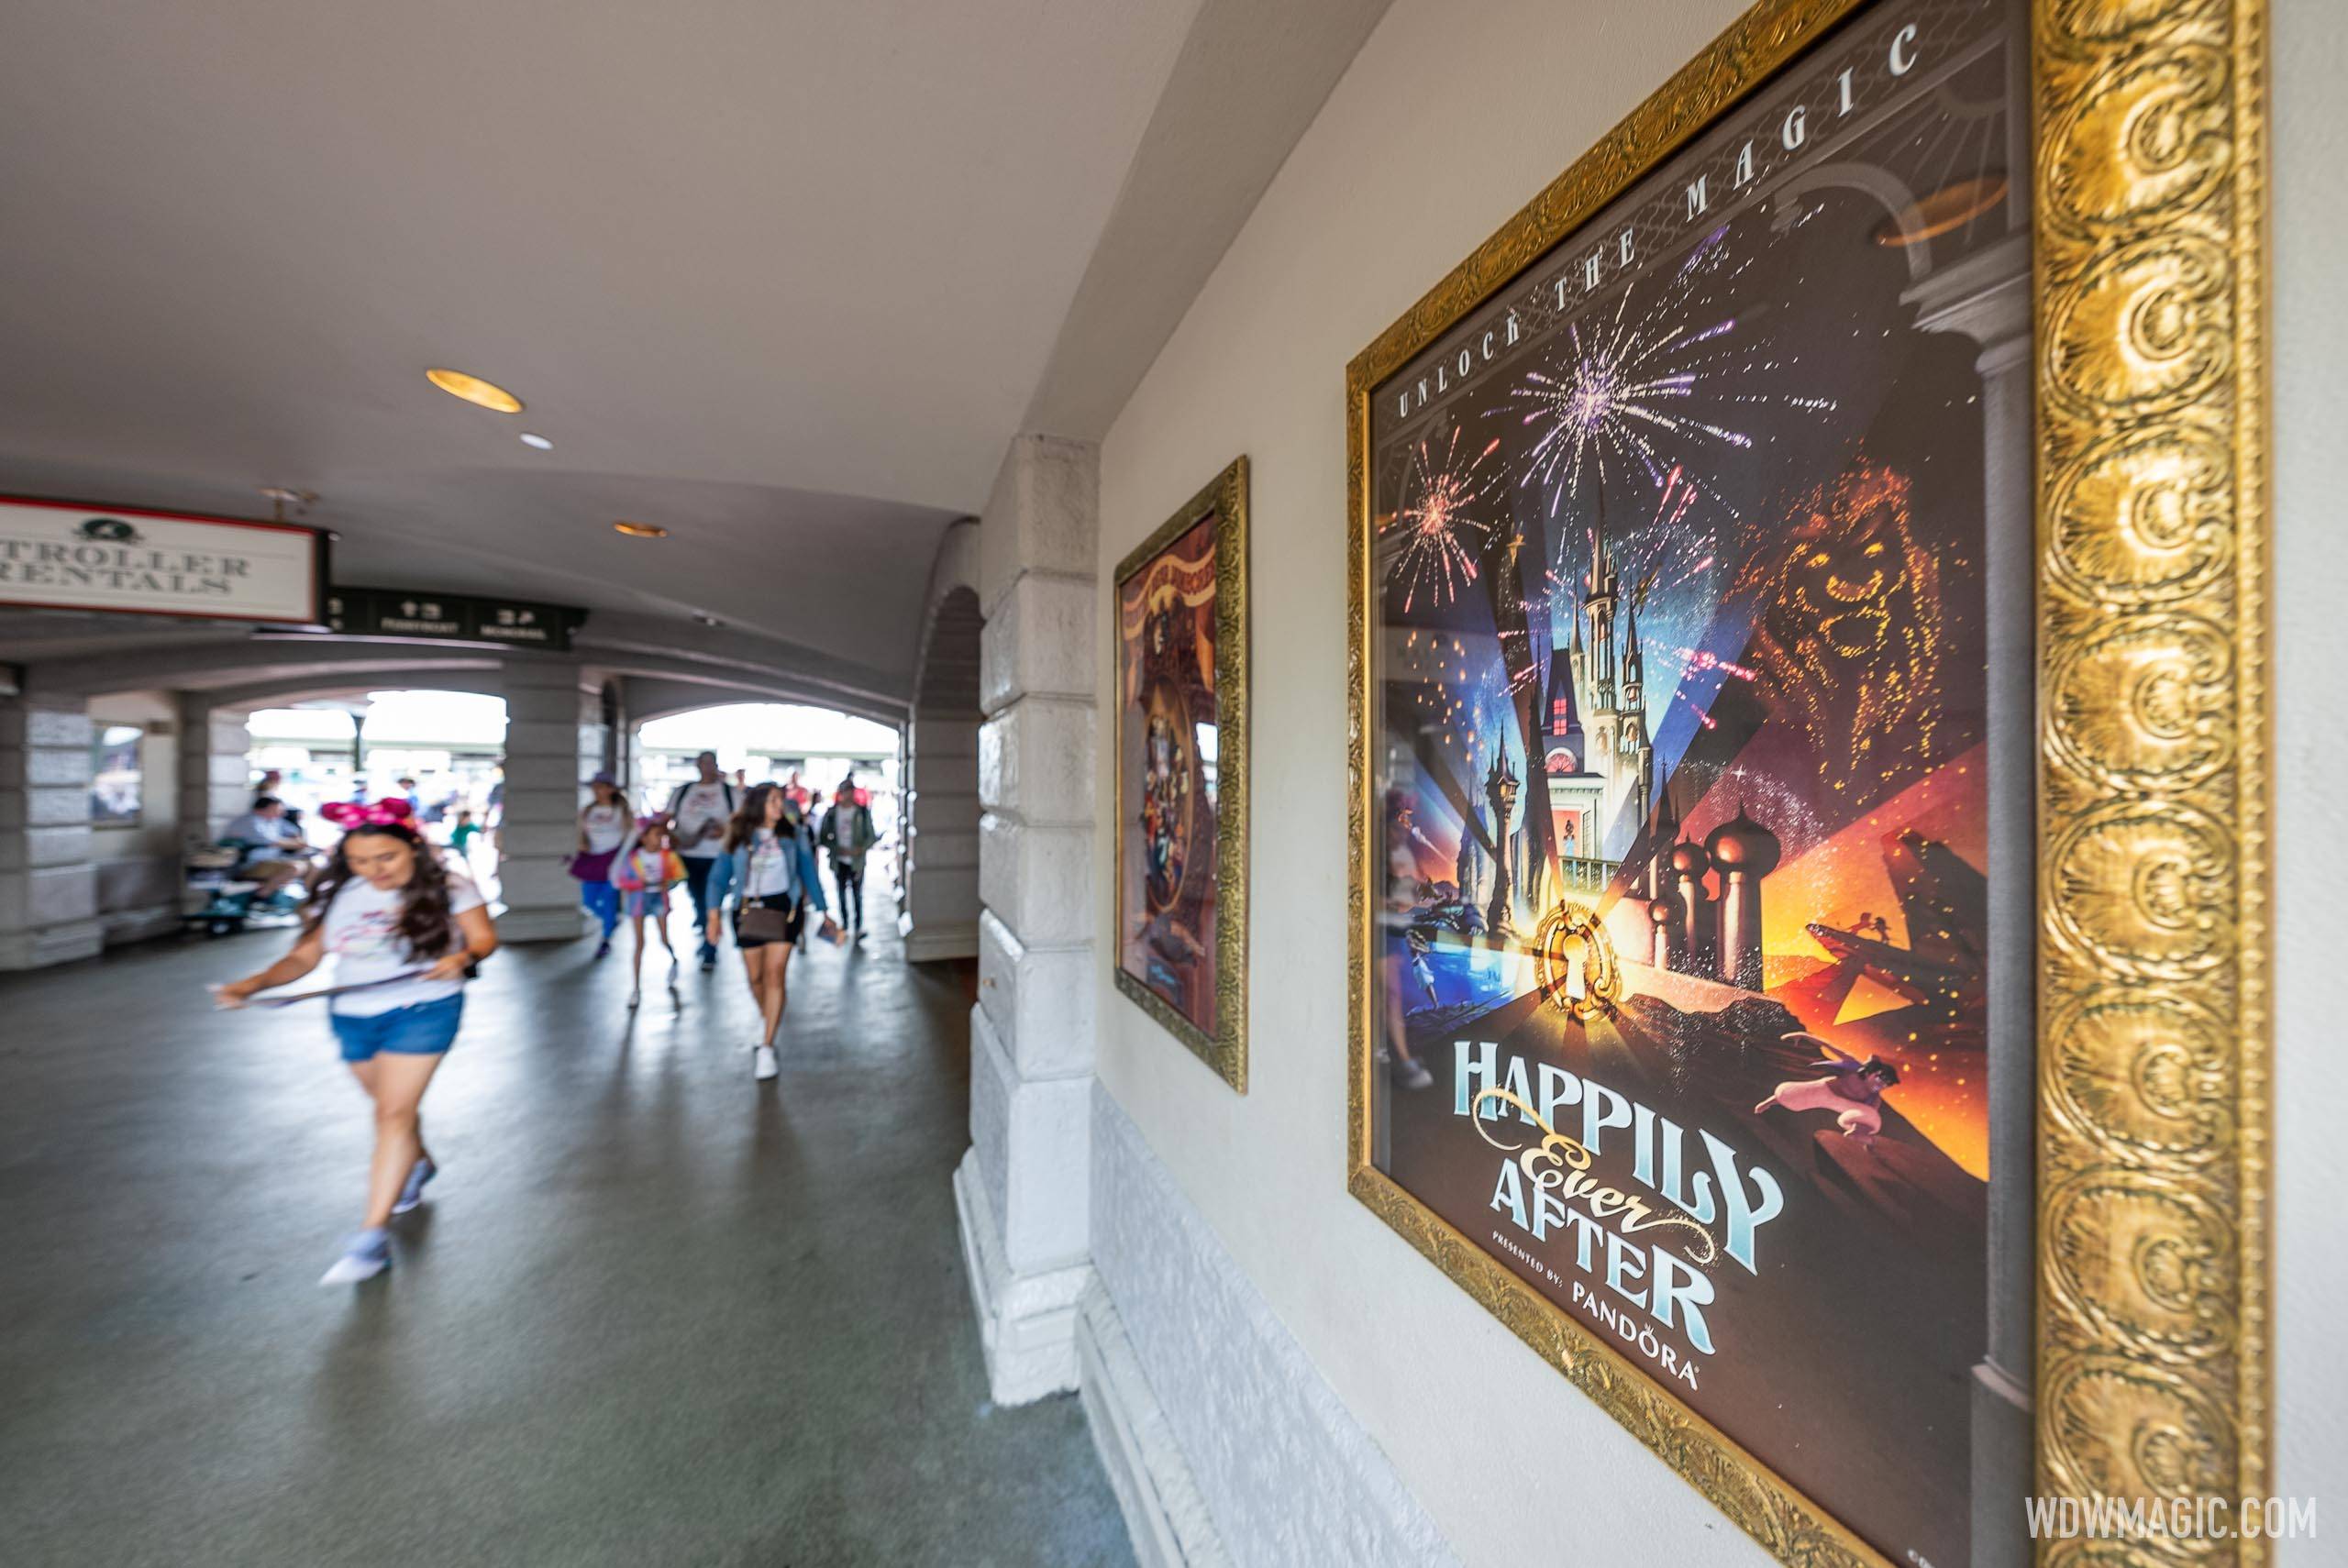 Magic Kingdom prepares for the return of Happily Ever After with a Main Street U.S.A. poster and new guide map